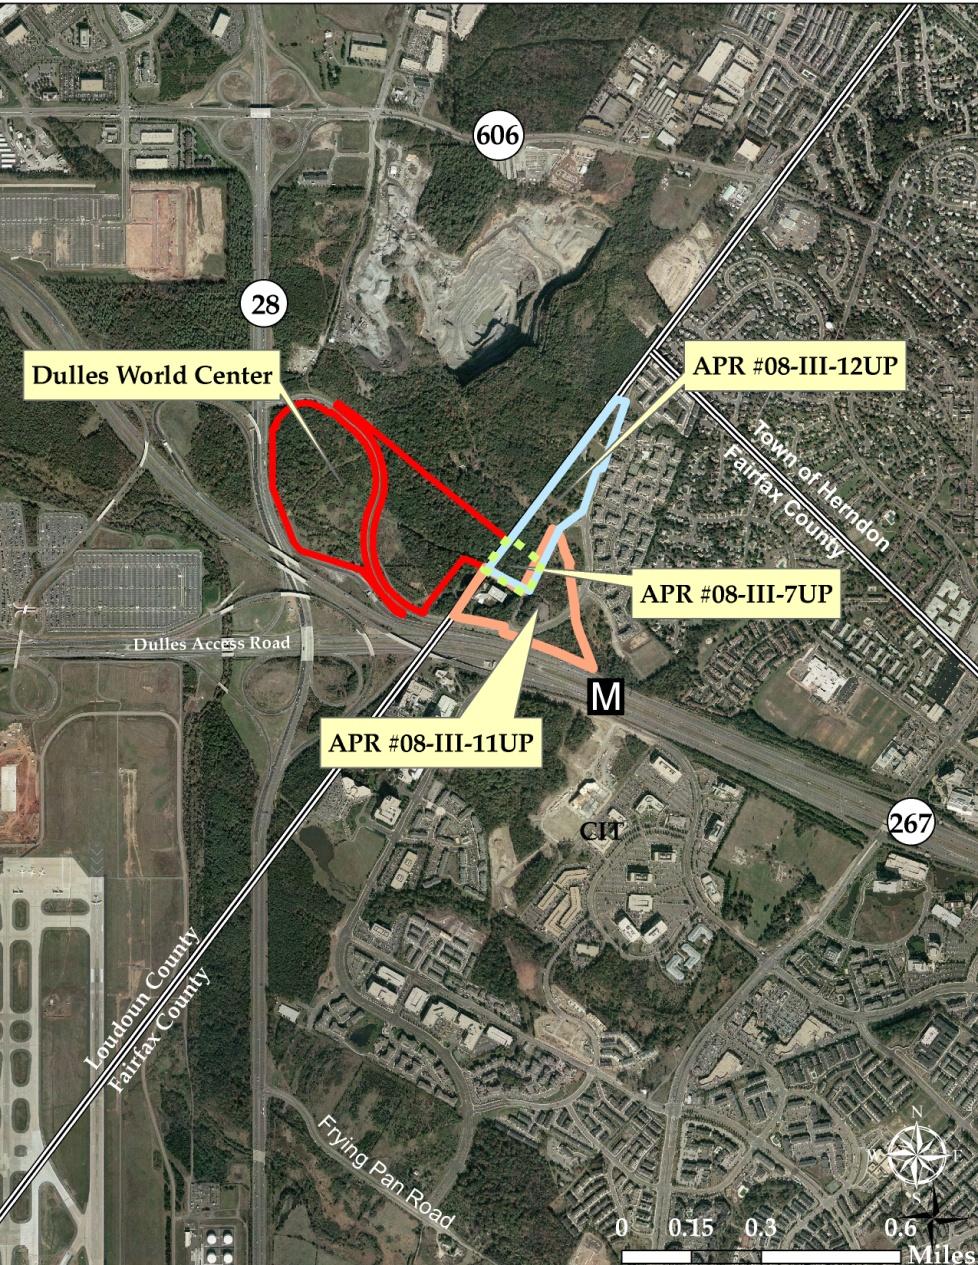 Route 28/Toll Road Area Source: Handout from